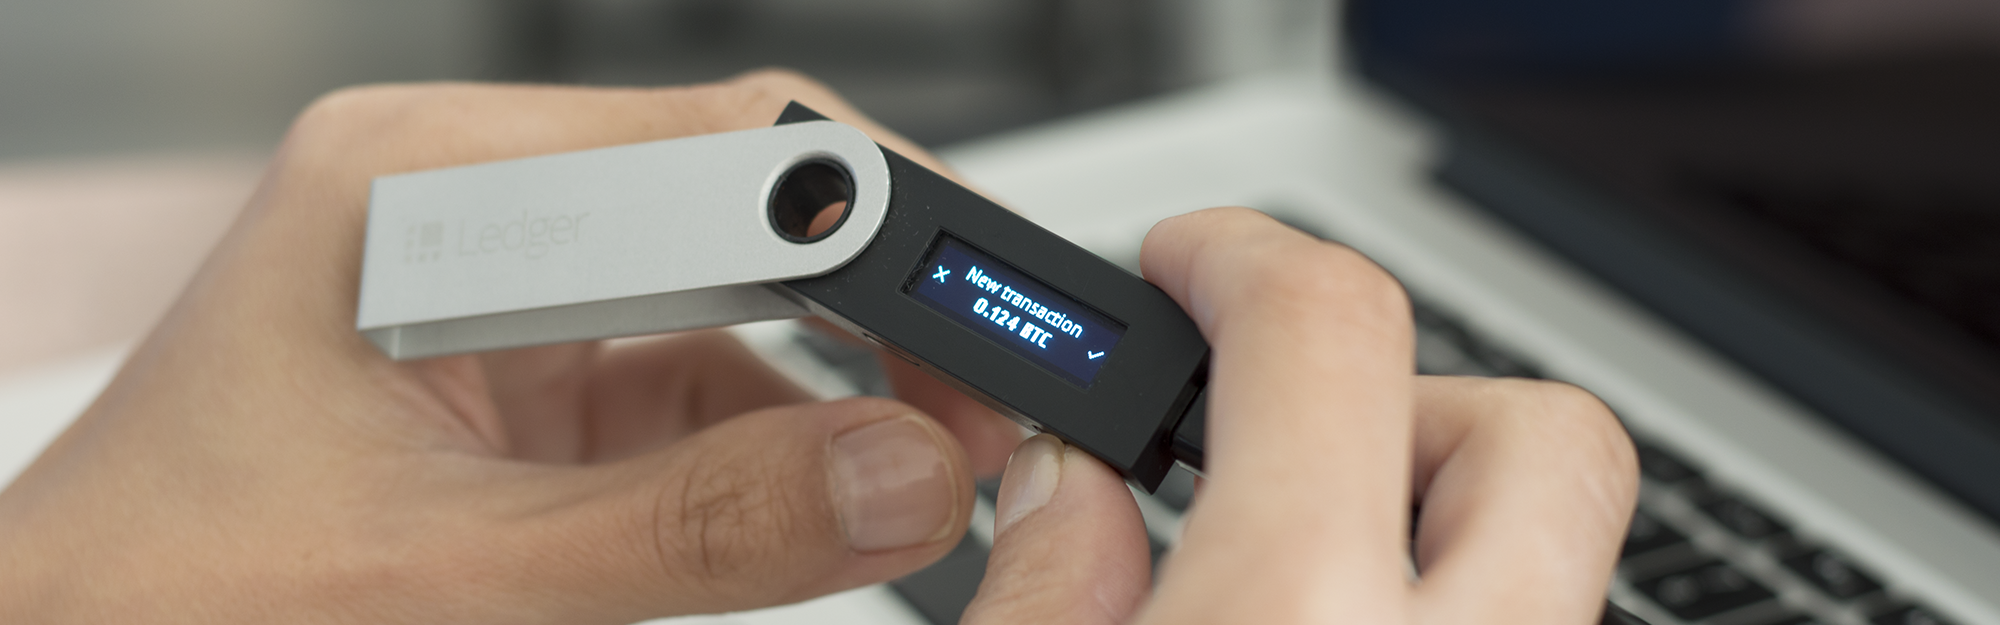 How to use Ledger Nano S Hardware Wallet - a Step-by-step Guide